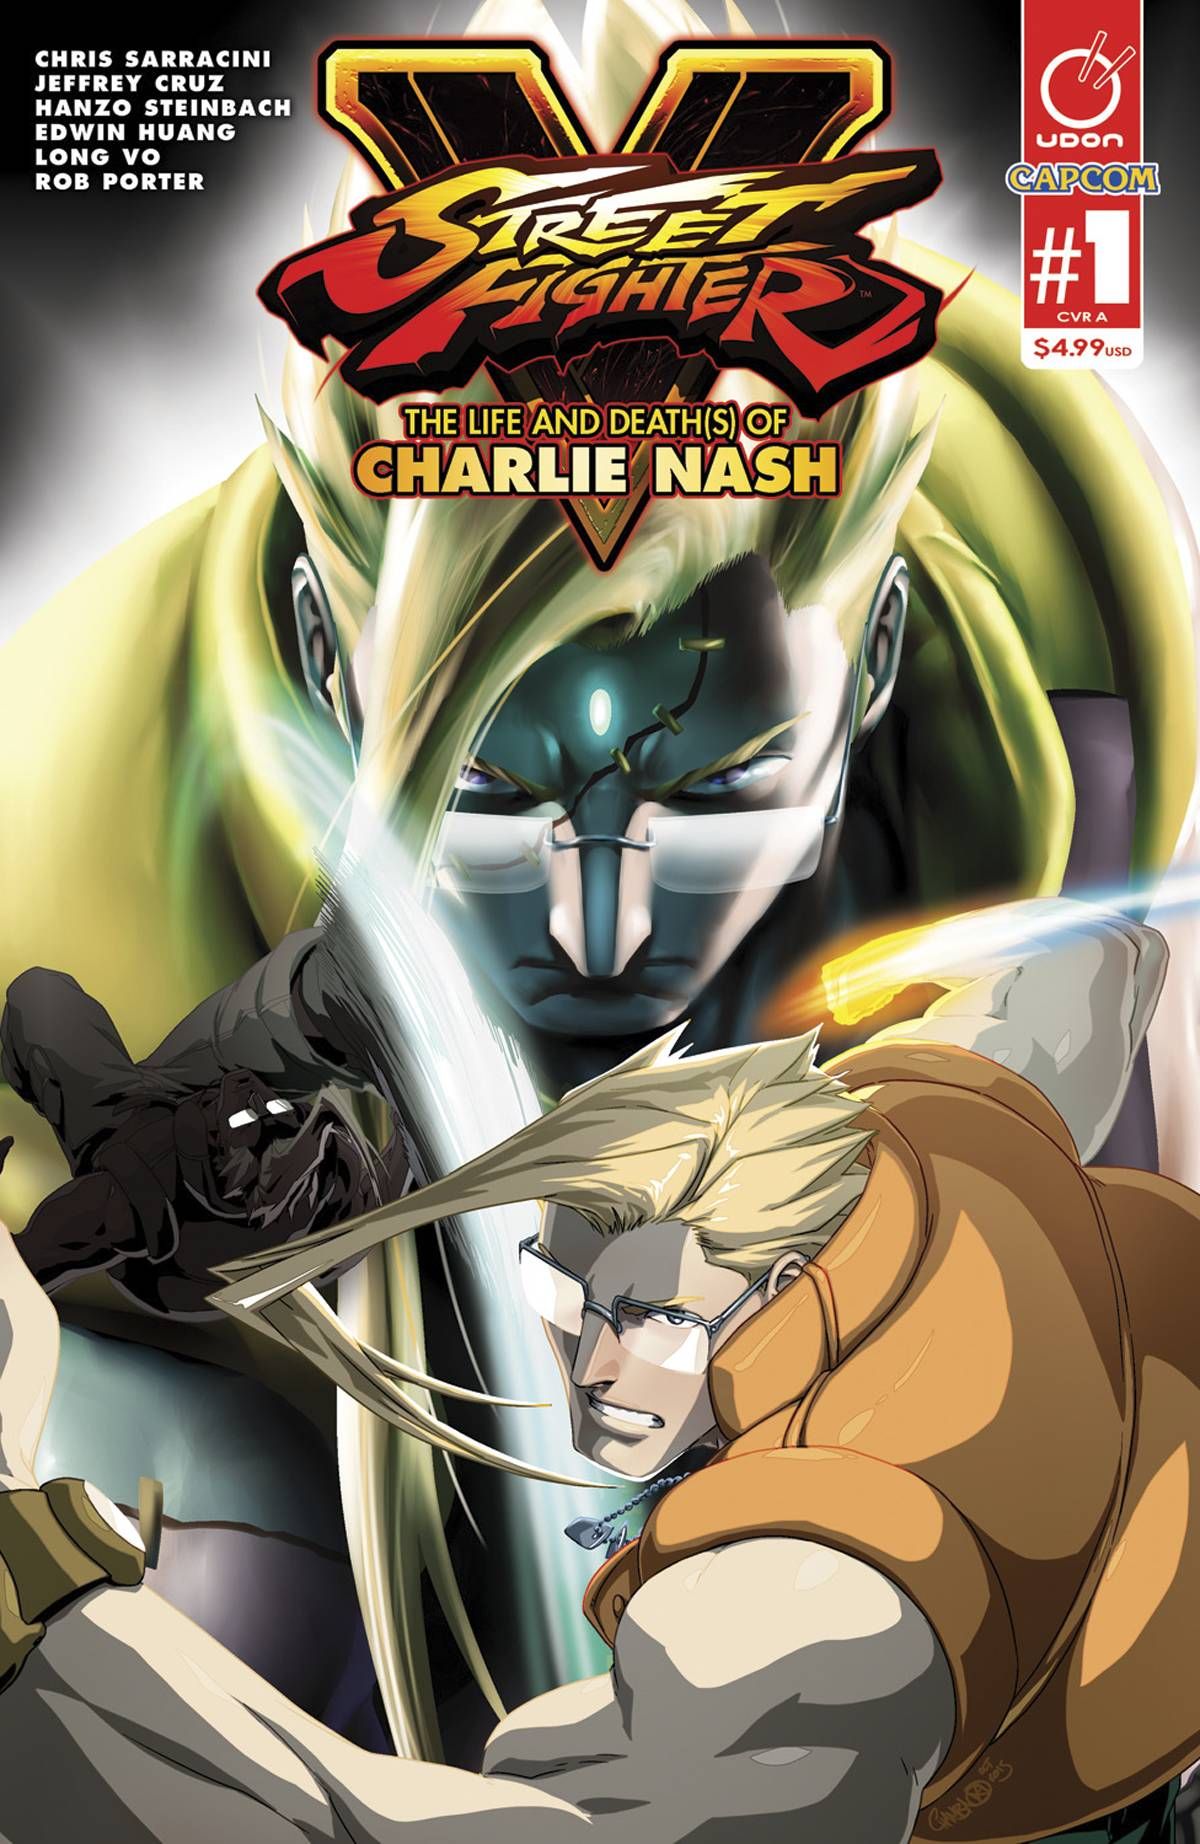 Street Fighter V: The Life and Death(s) of Charlie Nash #1 Comic